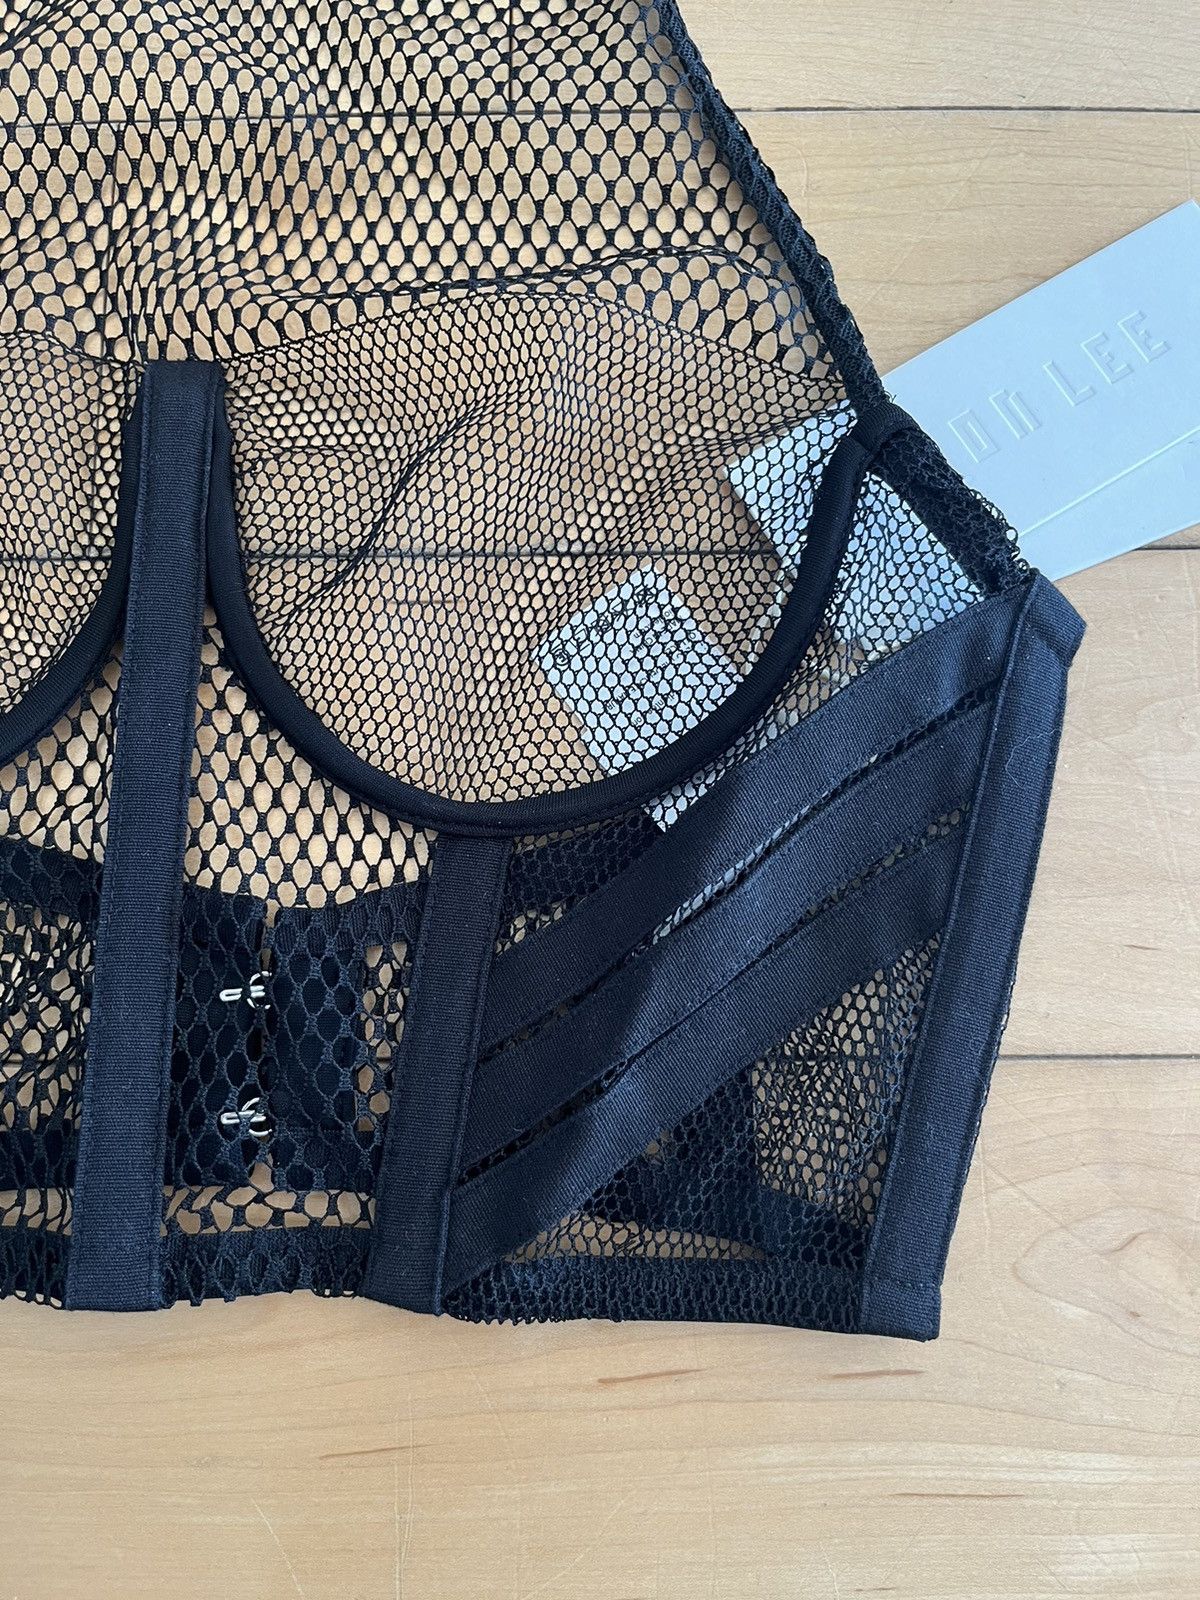 NWT - Dion Lee Lace Underwire Top - 3